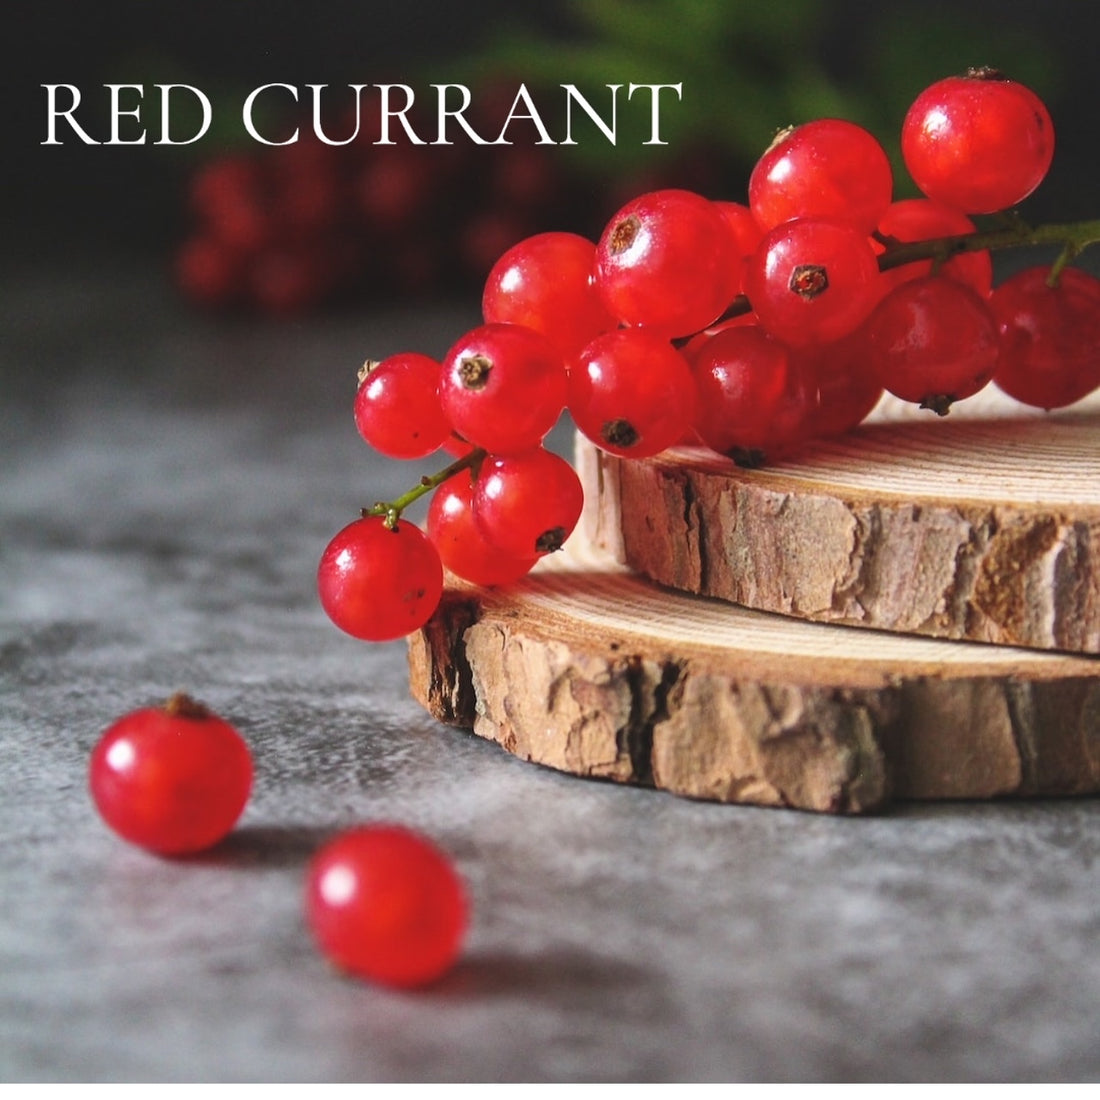 RED CURRANT - Room and Body Spray, Buy 2 get 1  FREE